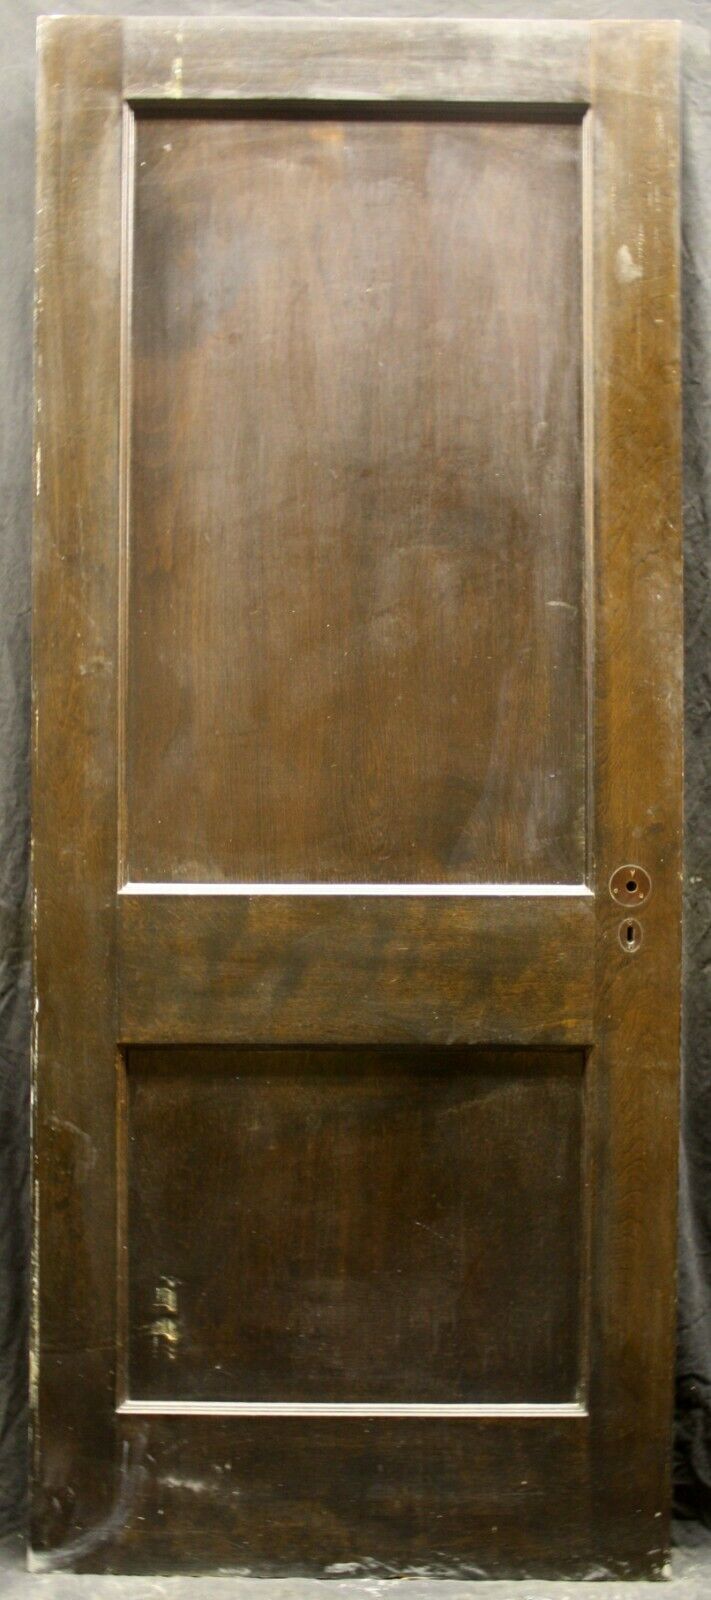 2 avail 32"x79.5" Antique Vintage Reclaimed Interior SOLID Wooden Doors Panels